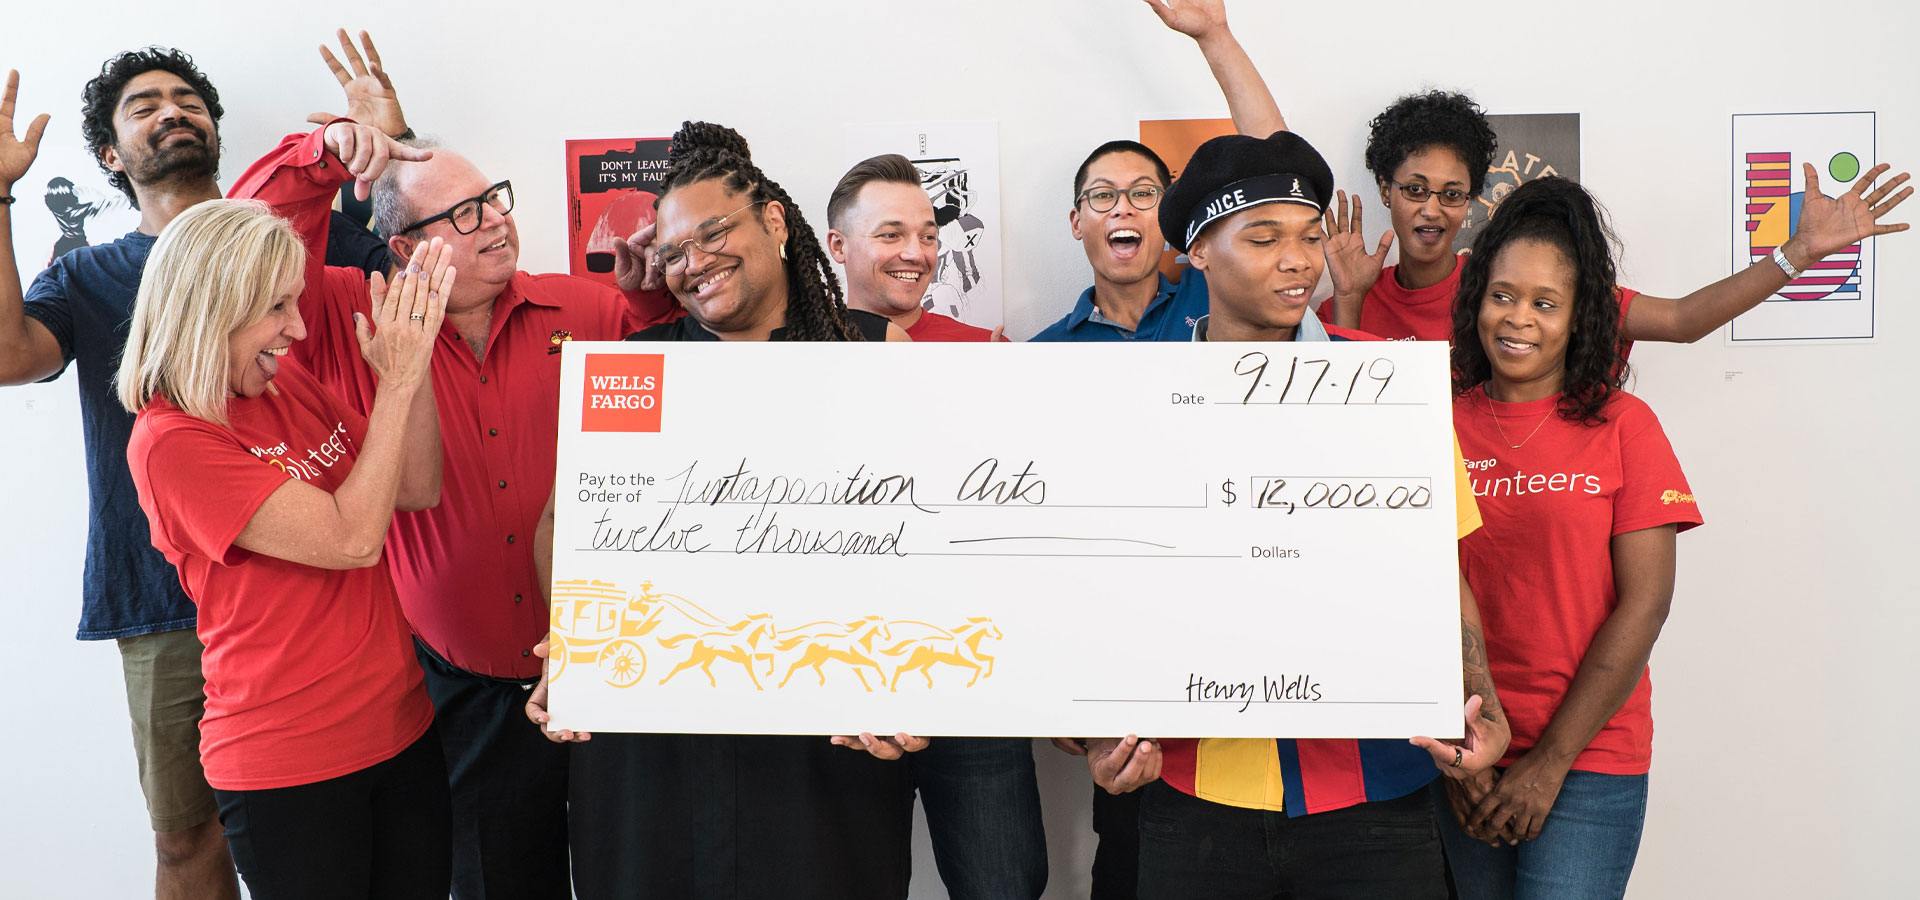 Several people looking celebratory and holding a giant check for $12,000 from Wells Fargo